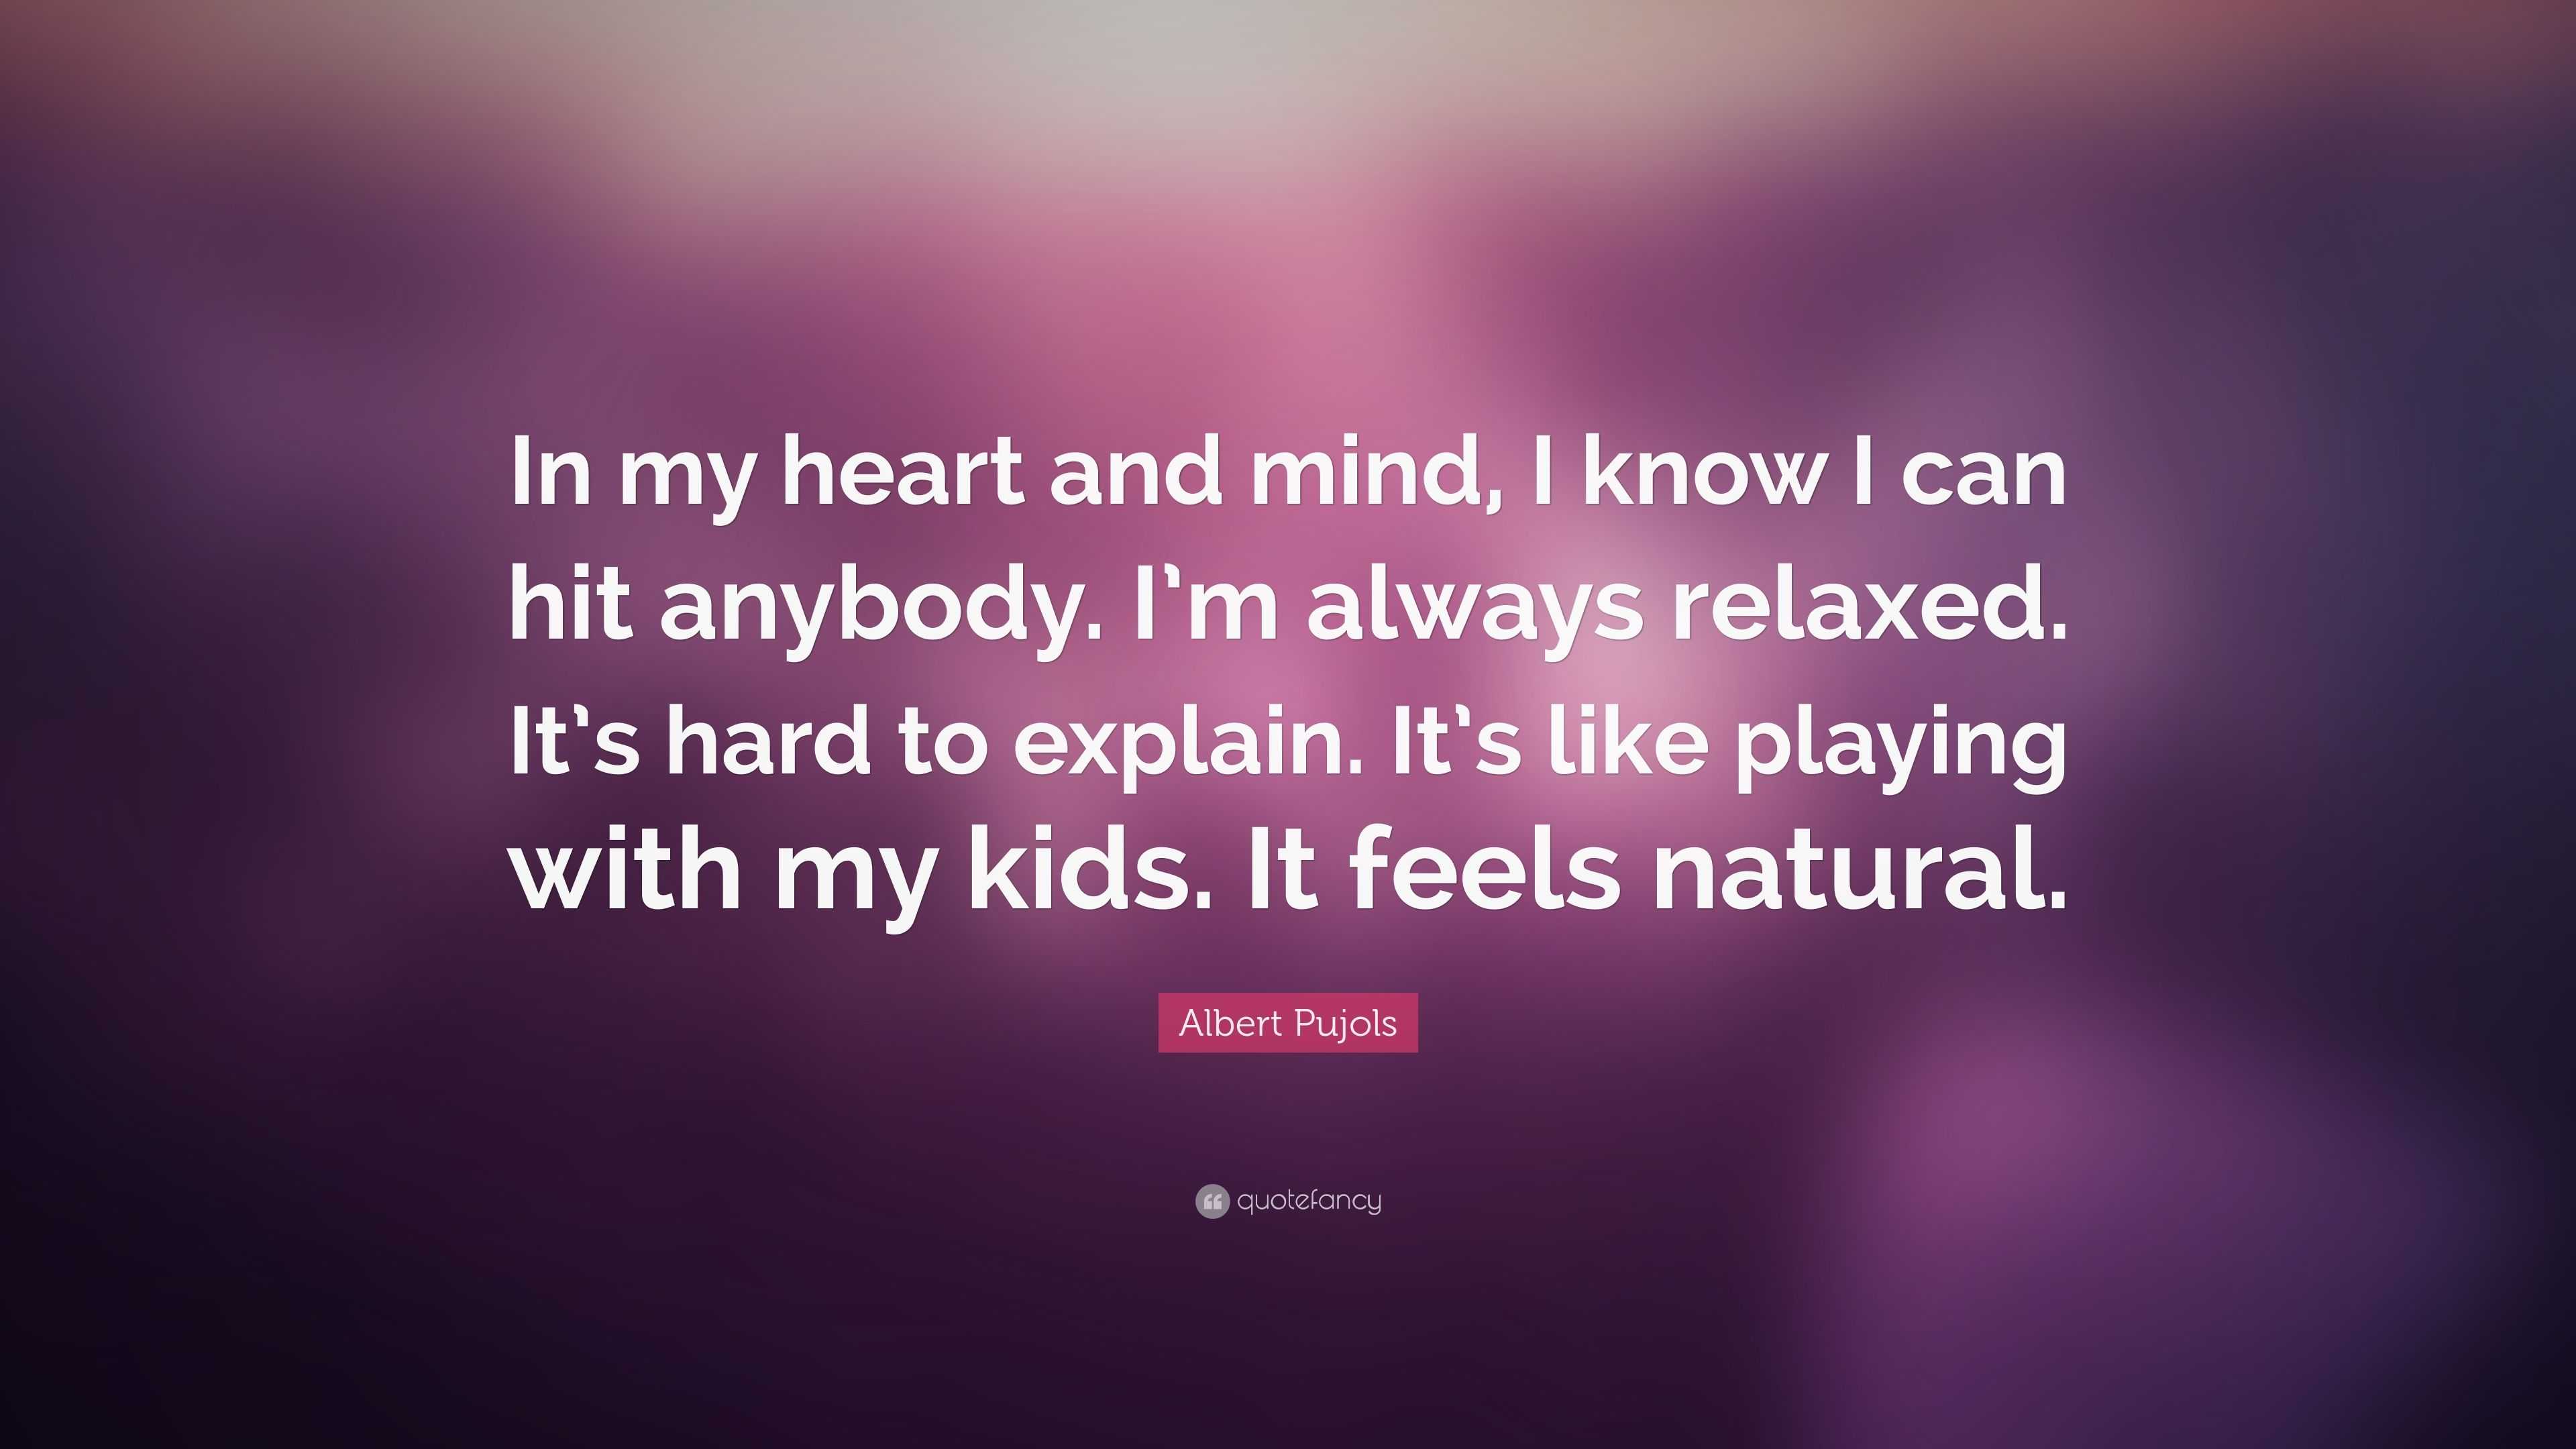 Albert Pujols Quote: “In my heart and mind, I know I can hit anybody. I'm  always relaxed. It's hard to explain. It's like playing with my kids”